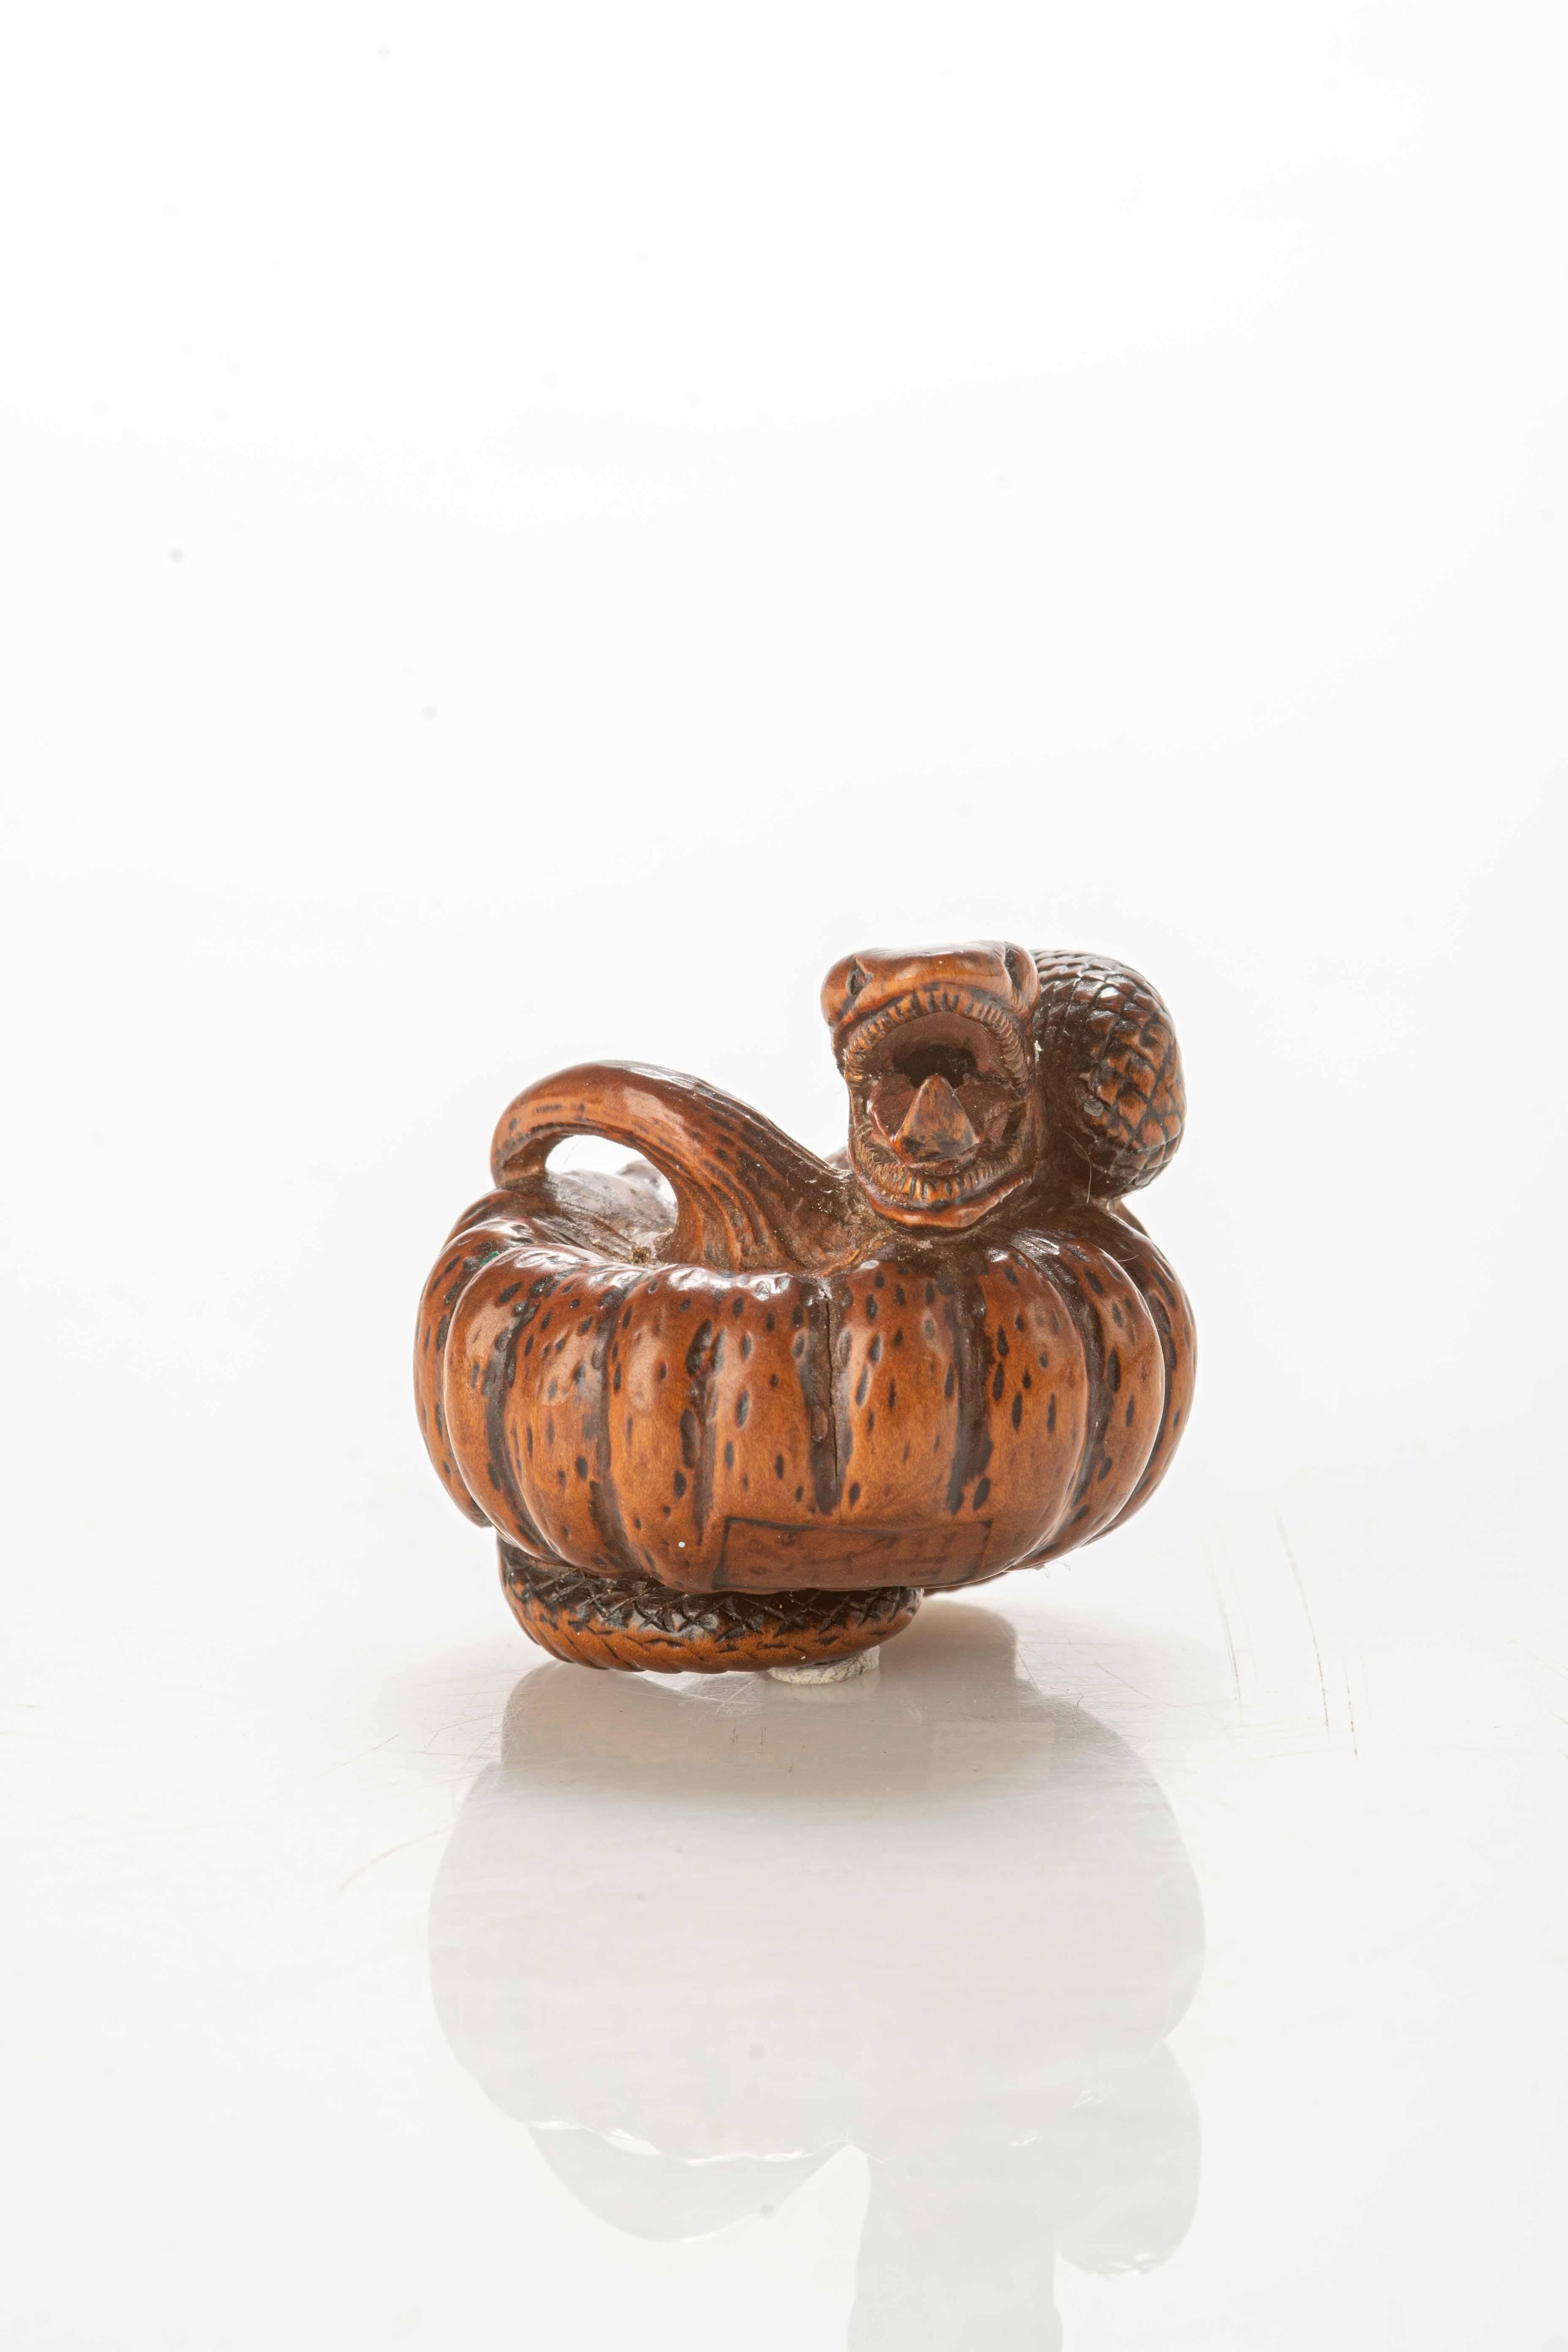 Boxwood netsuke depicting a snake wrapping around a pumpkin.

The snake is a symbol often associated with rebirth, transformation while the pumpkin is a symbol of fertility, abundance and prosperity in Japanese tradition.

Signed Yoshimasa (吉正)